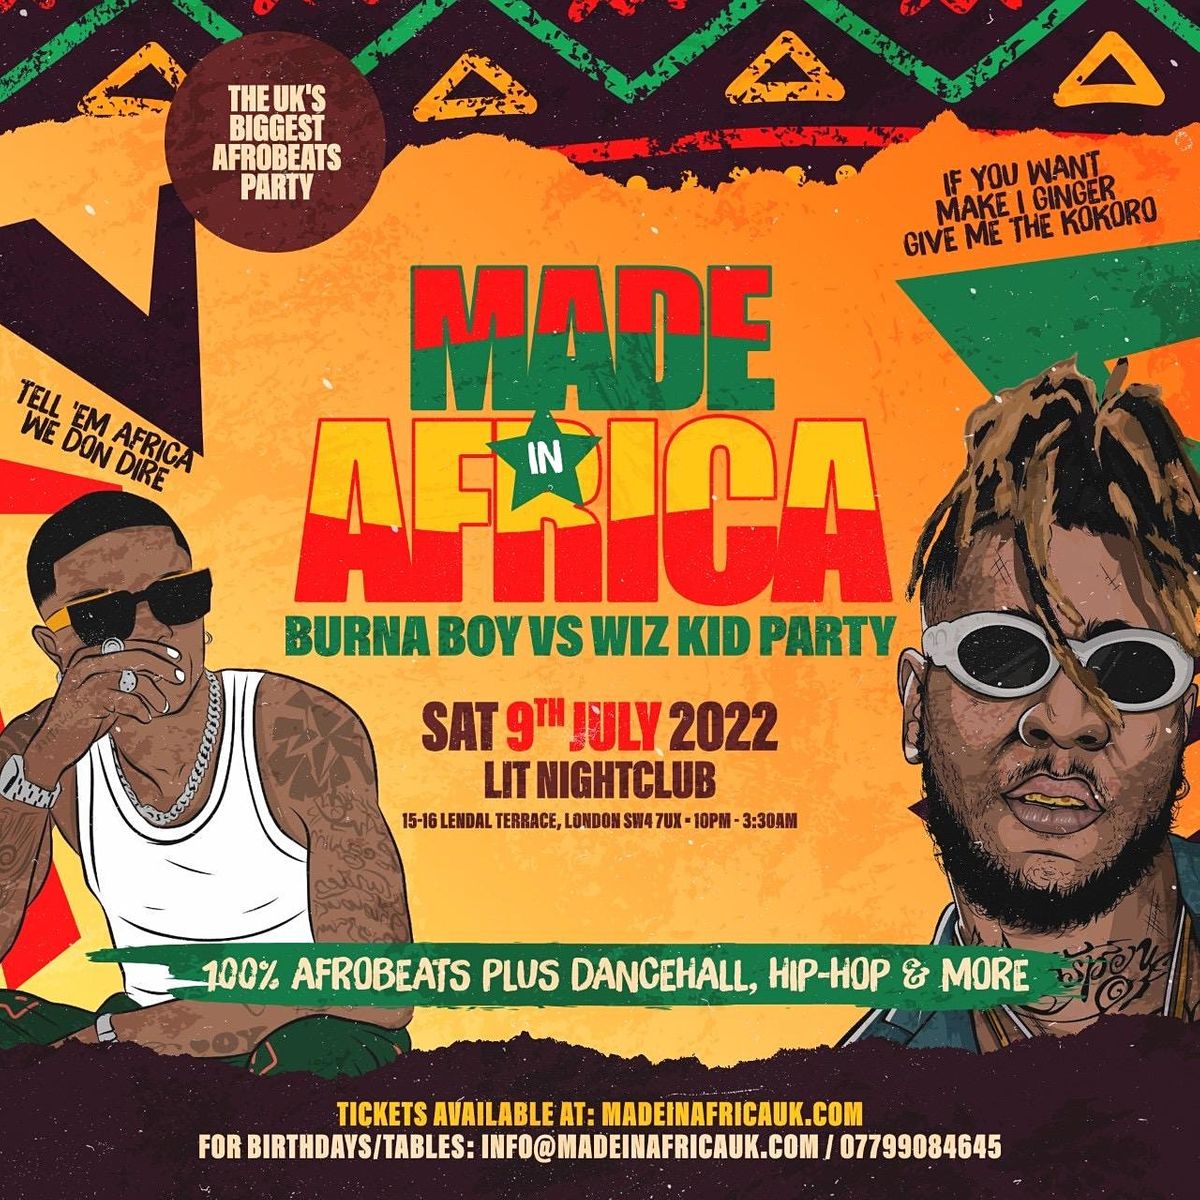 Made In Africa - London's Biggest Afrobeats Party